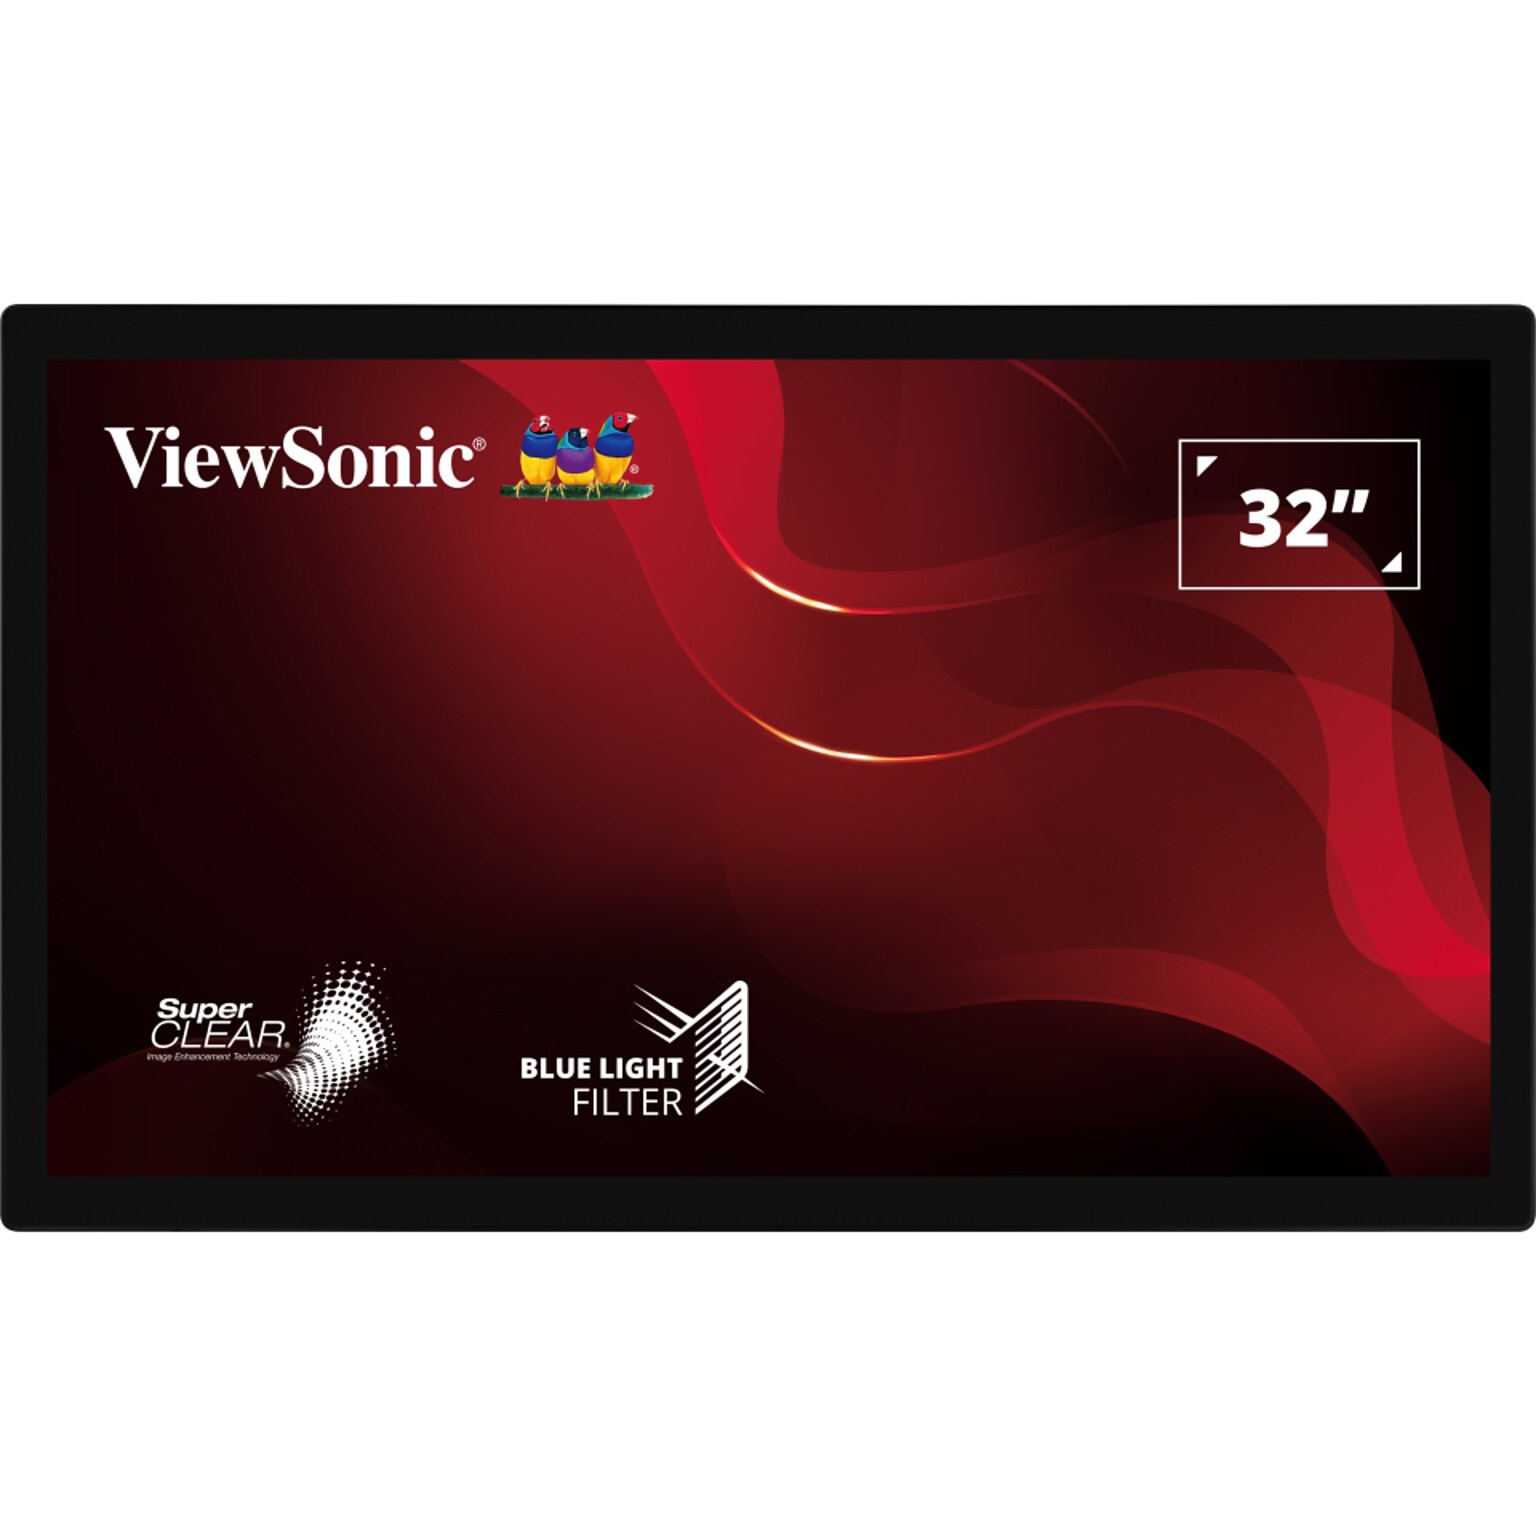 ViewSonic 32 60 Hz LCD Open-Frame Touch Monitor, Black (TD3207)